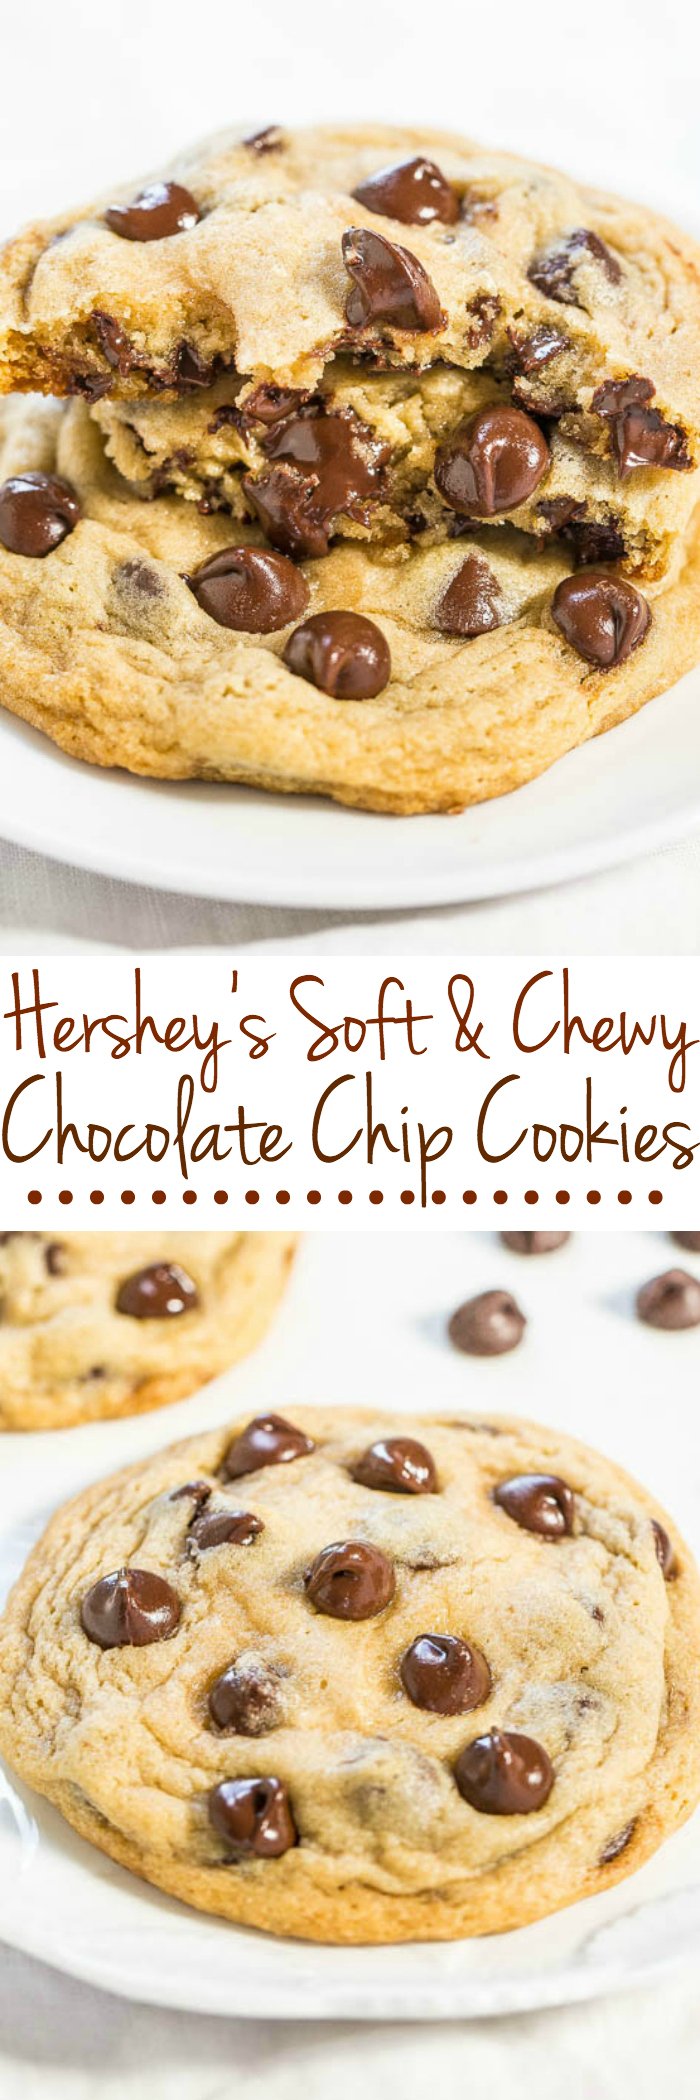 Hershey's Chocolate Chip Cookie Recipe — An old-time recipe that's a keeper!! Chocolaty, buttery, soft cookie PERFECTION!! If you need a recipe so your cookies stay ultra soft for days, this is the one!!